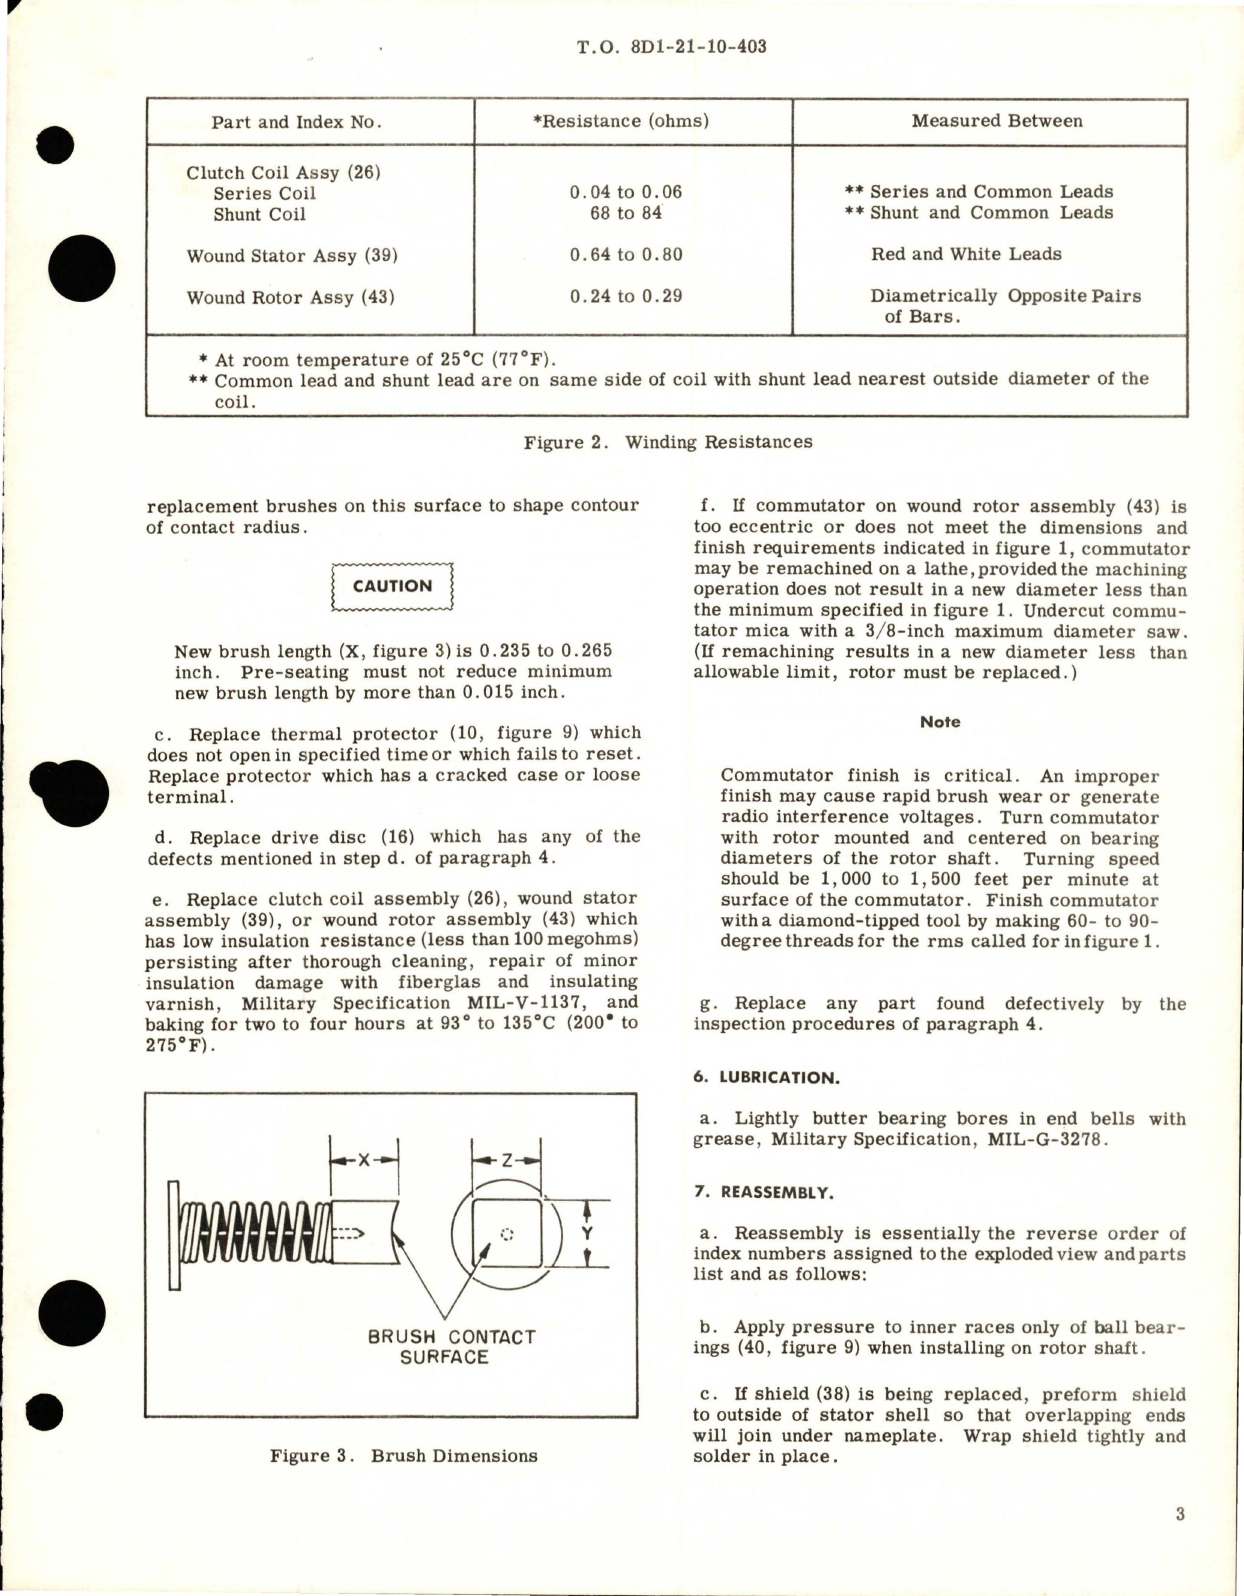 Sample page 5 from AirCorps Library document: Supplement to Overhaul Instructions with Parts Breakdown for Motor - Part 27944-19